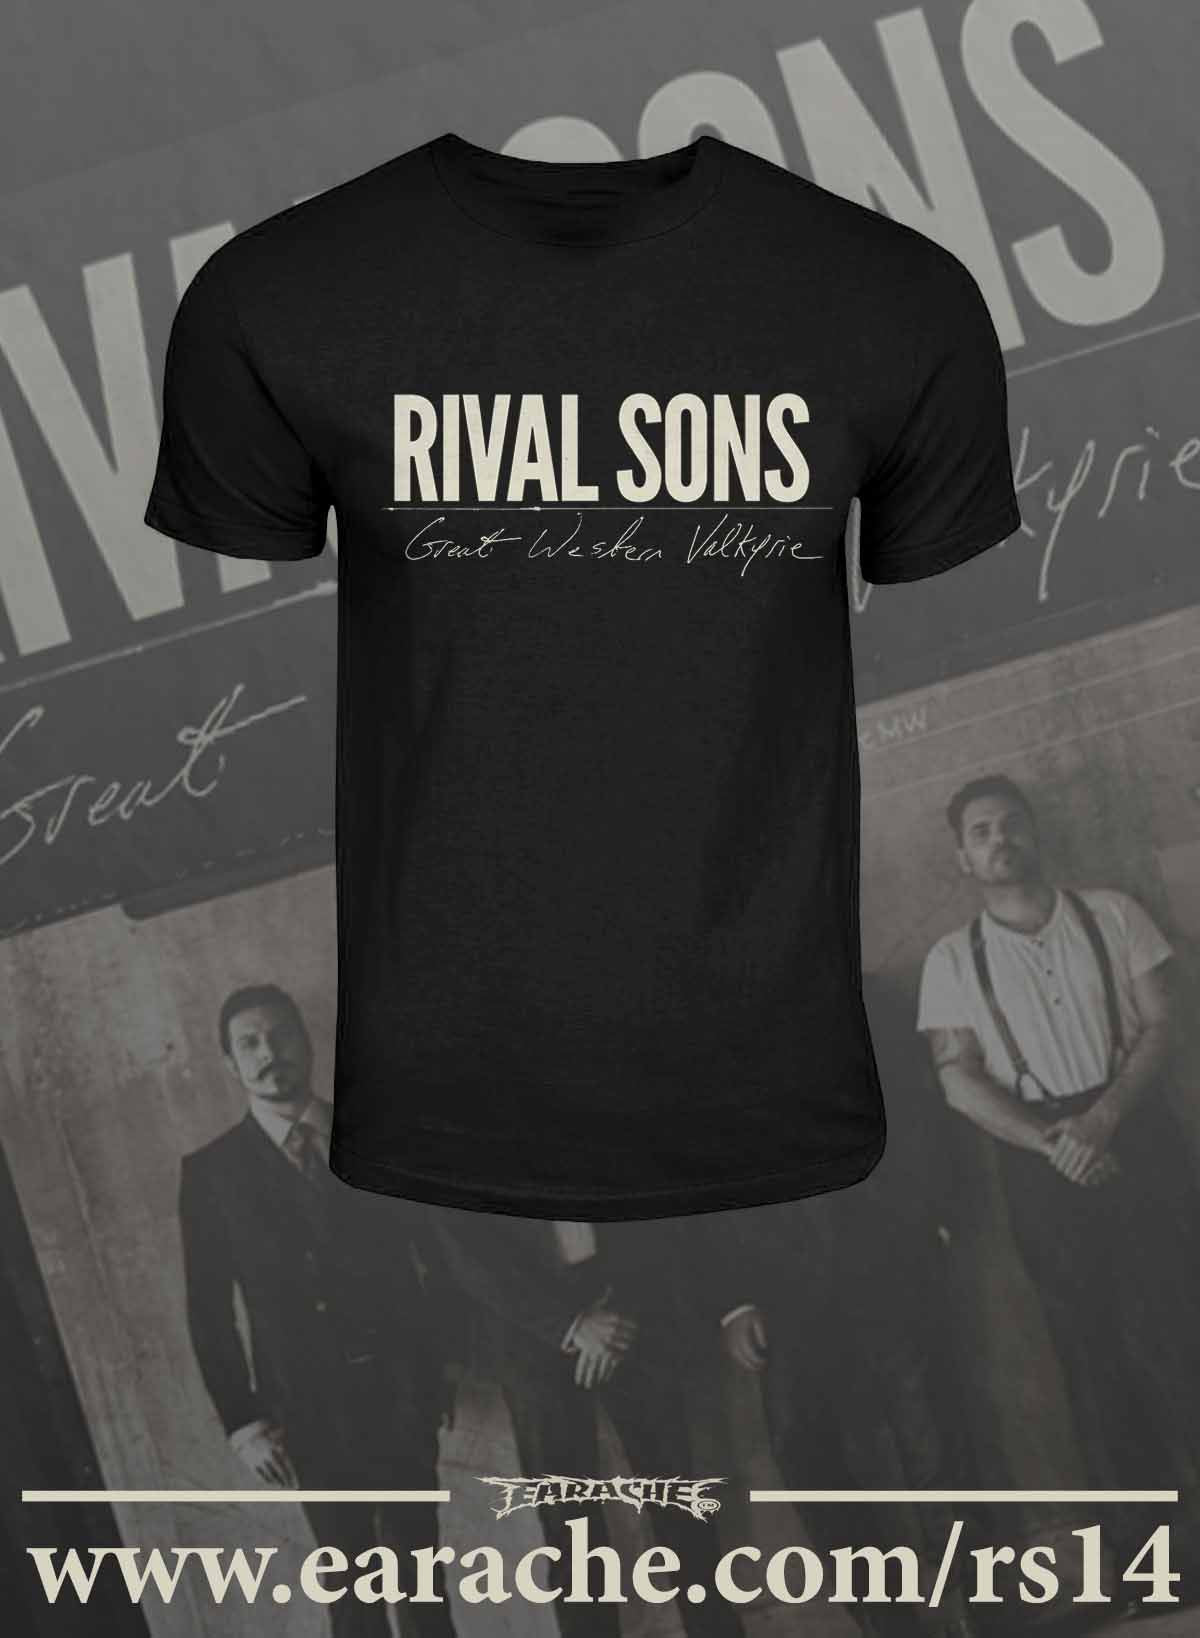 Rival Sons "Great Western Valkyrie" Logo T-shirt